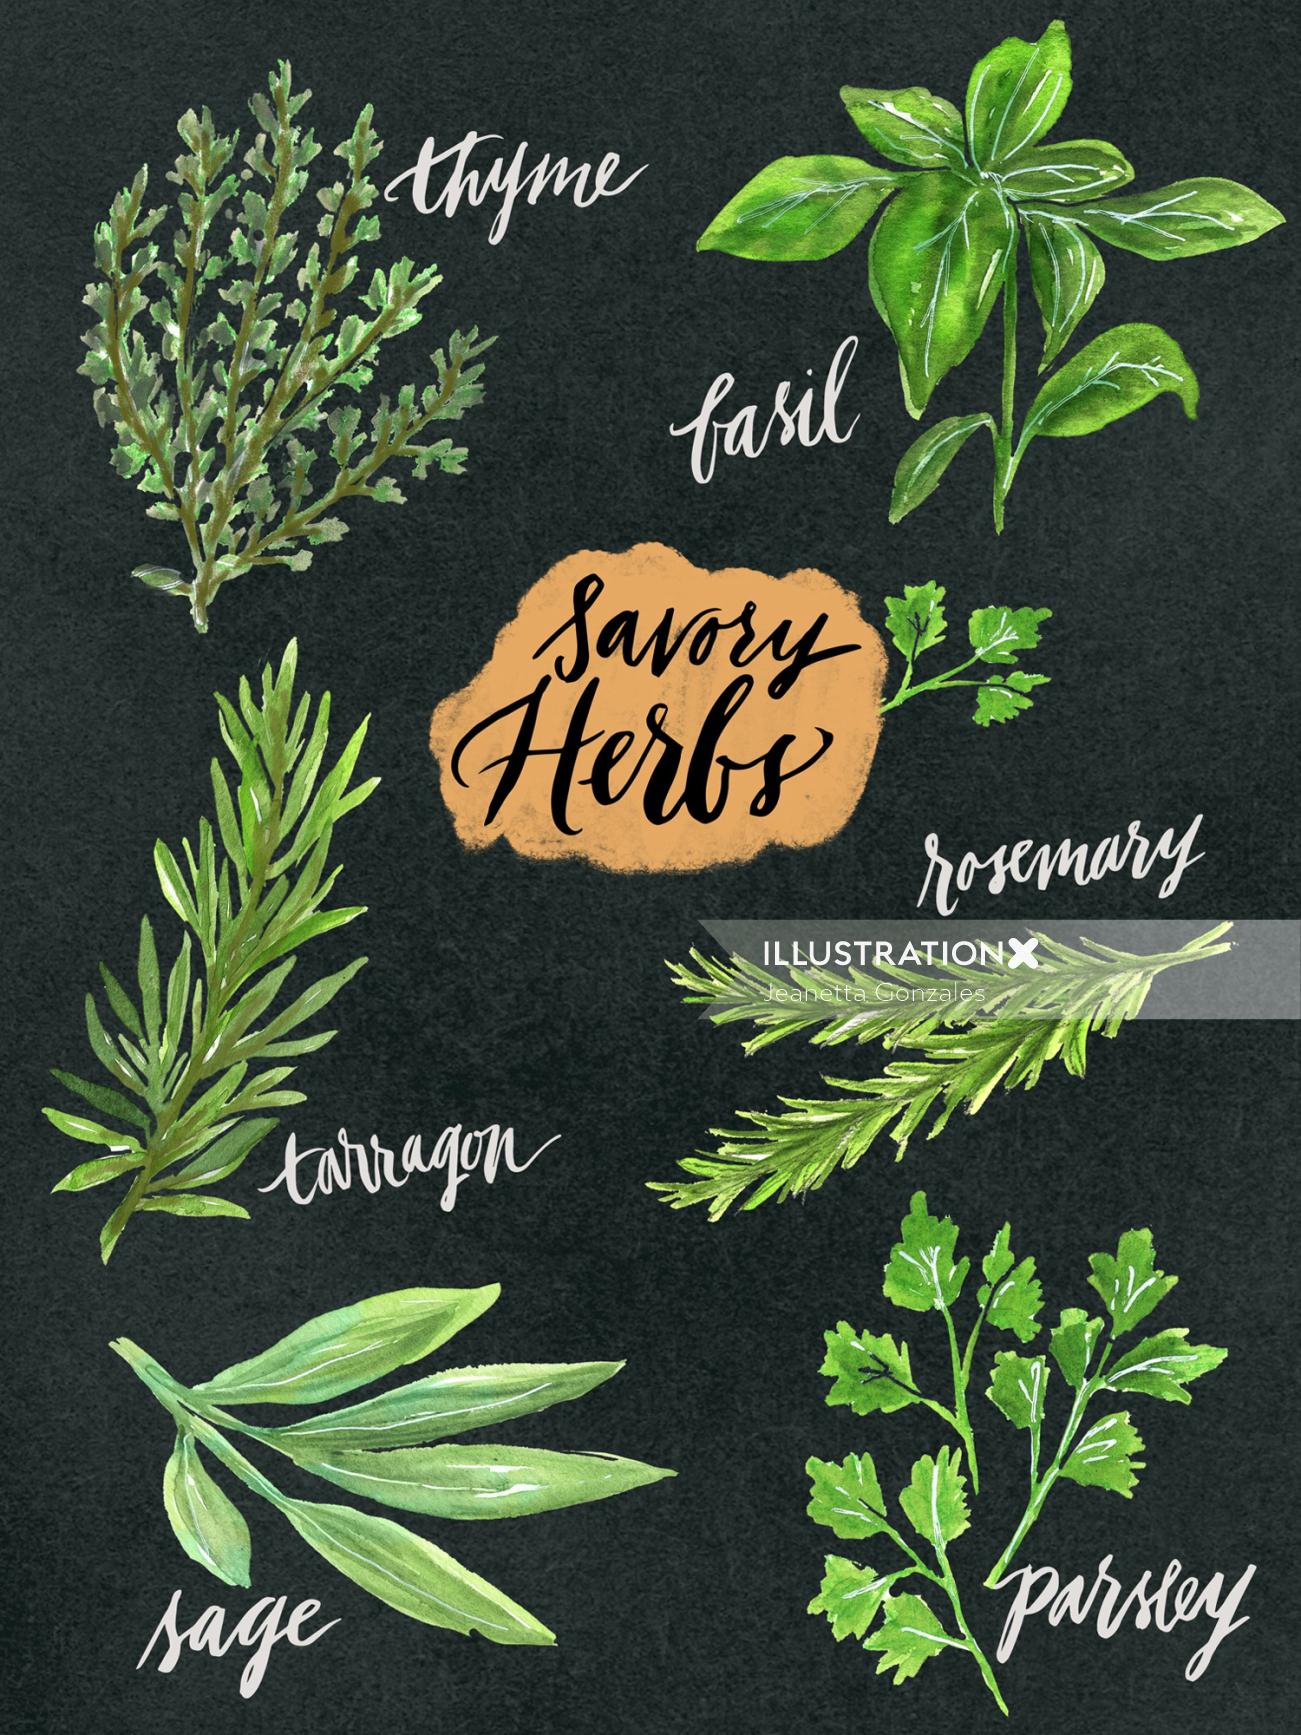 Lettering art of savory hearts 